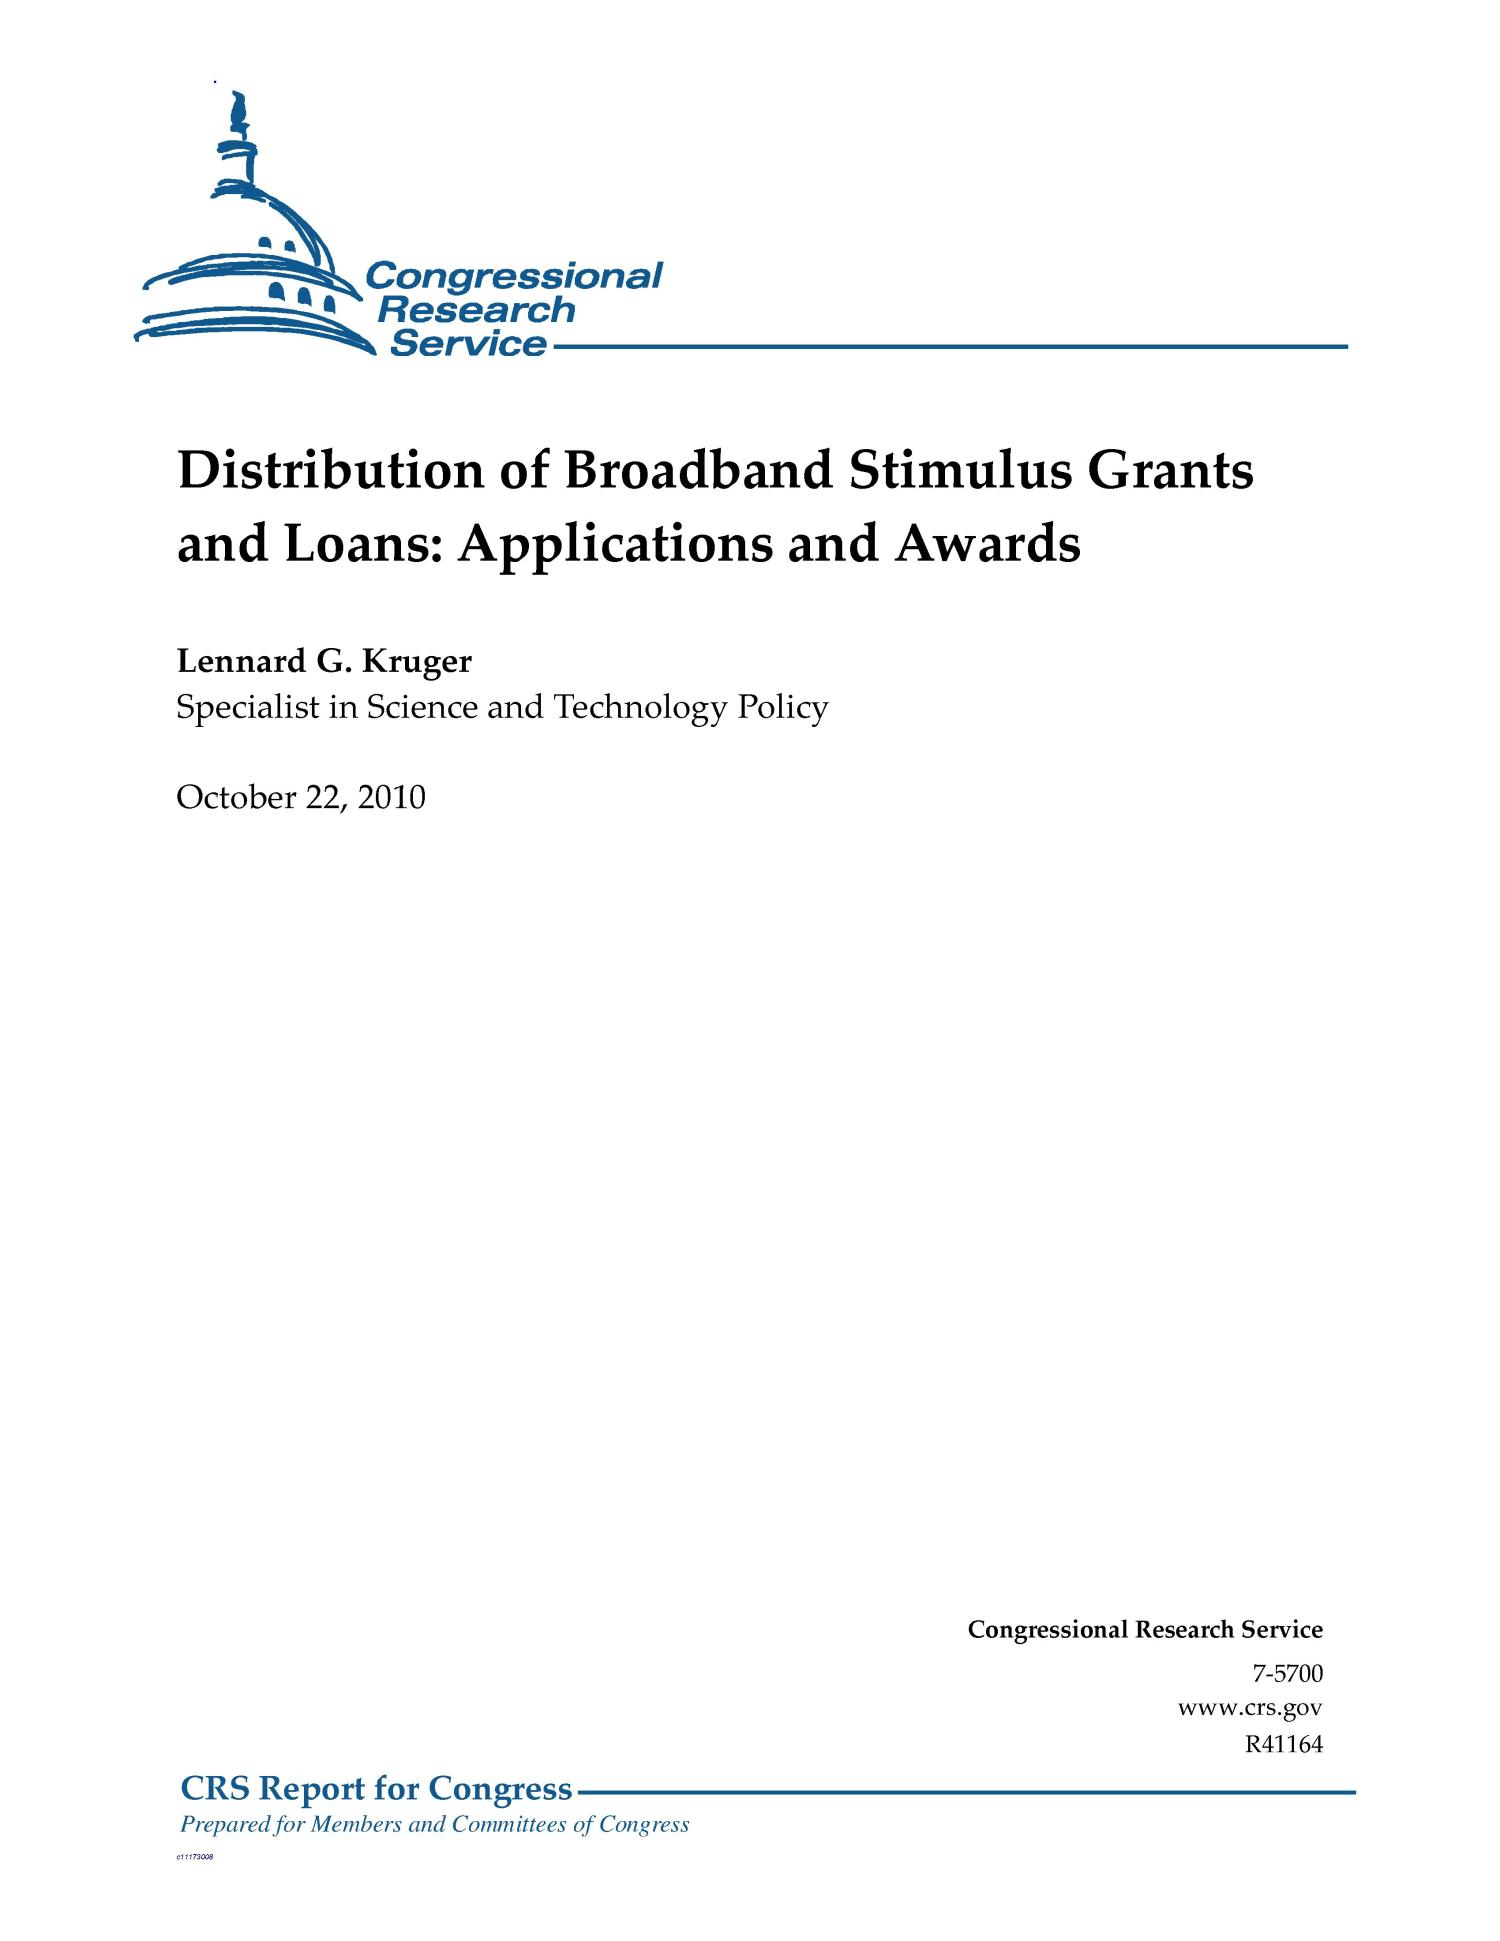 distribution-of-broadband-stimulus-grants-and-loans-applications-and